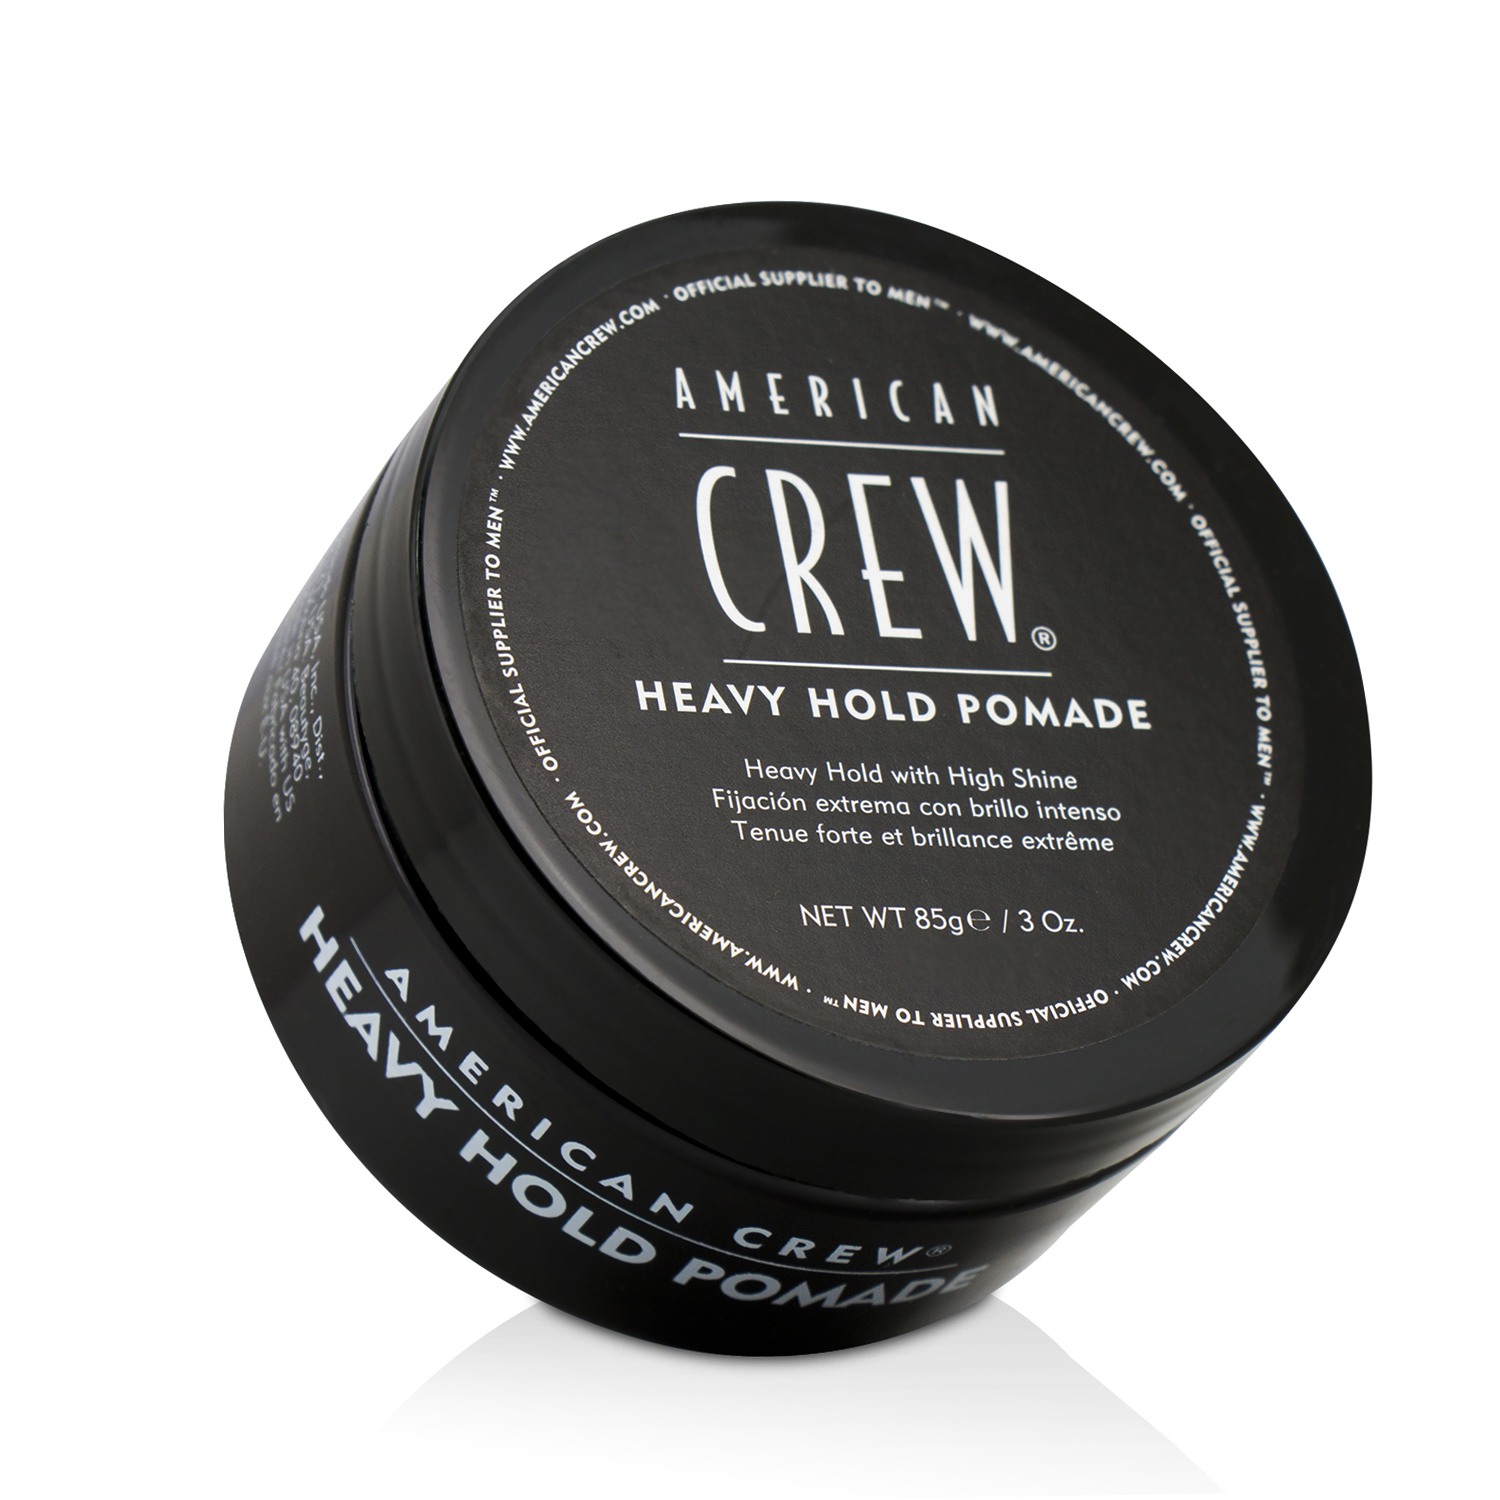 Men Heavy Hold Pomade (Heavy Hold with High Shine) American Crew Image